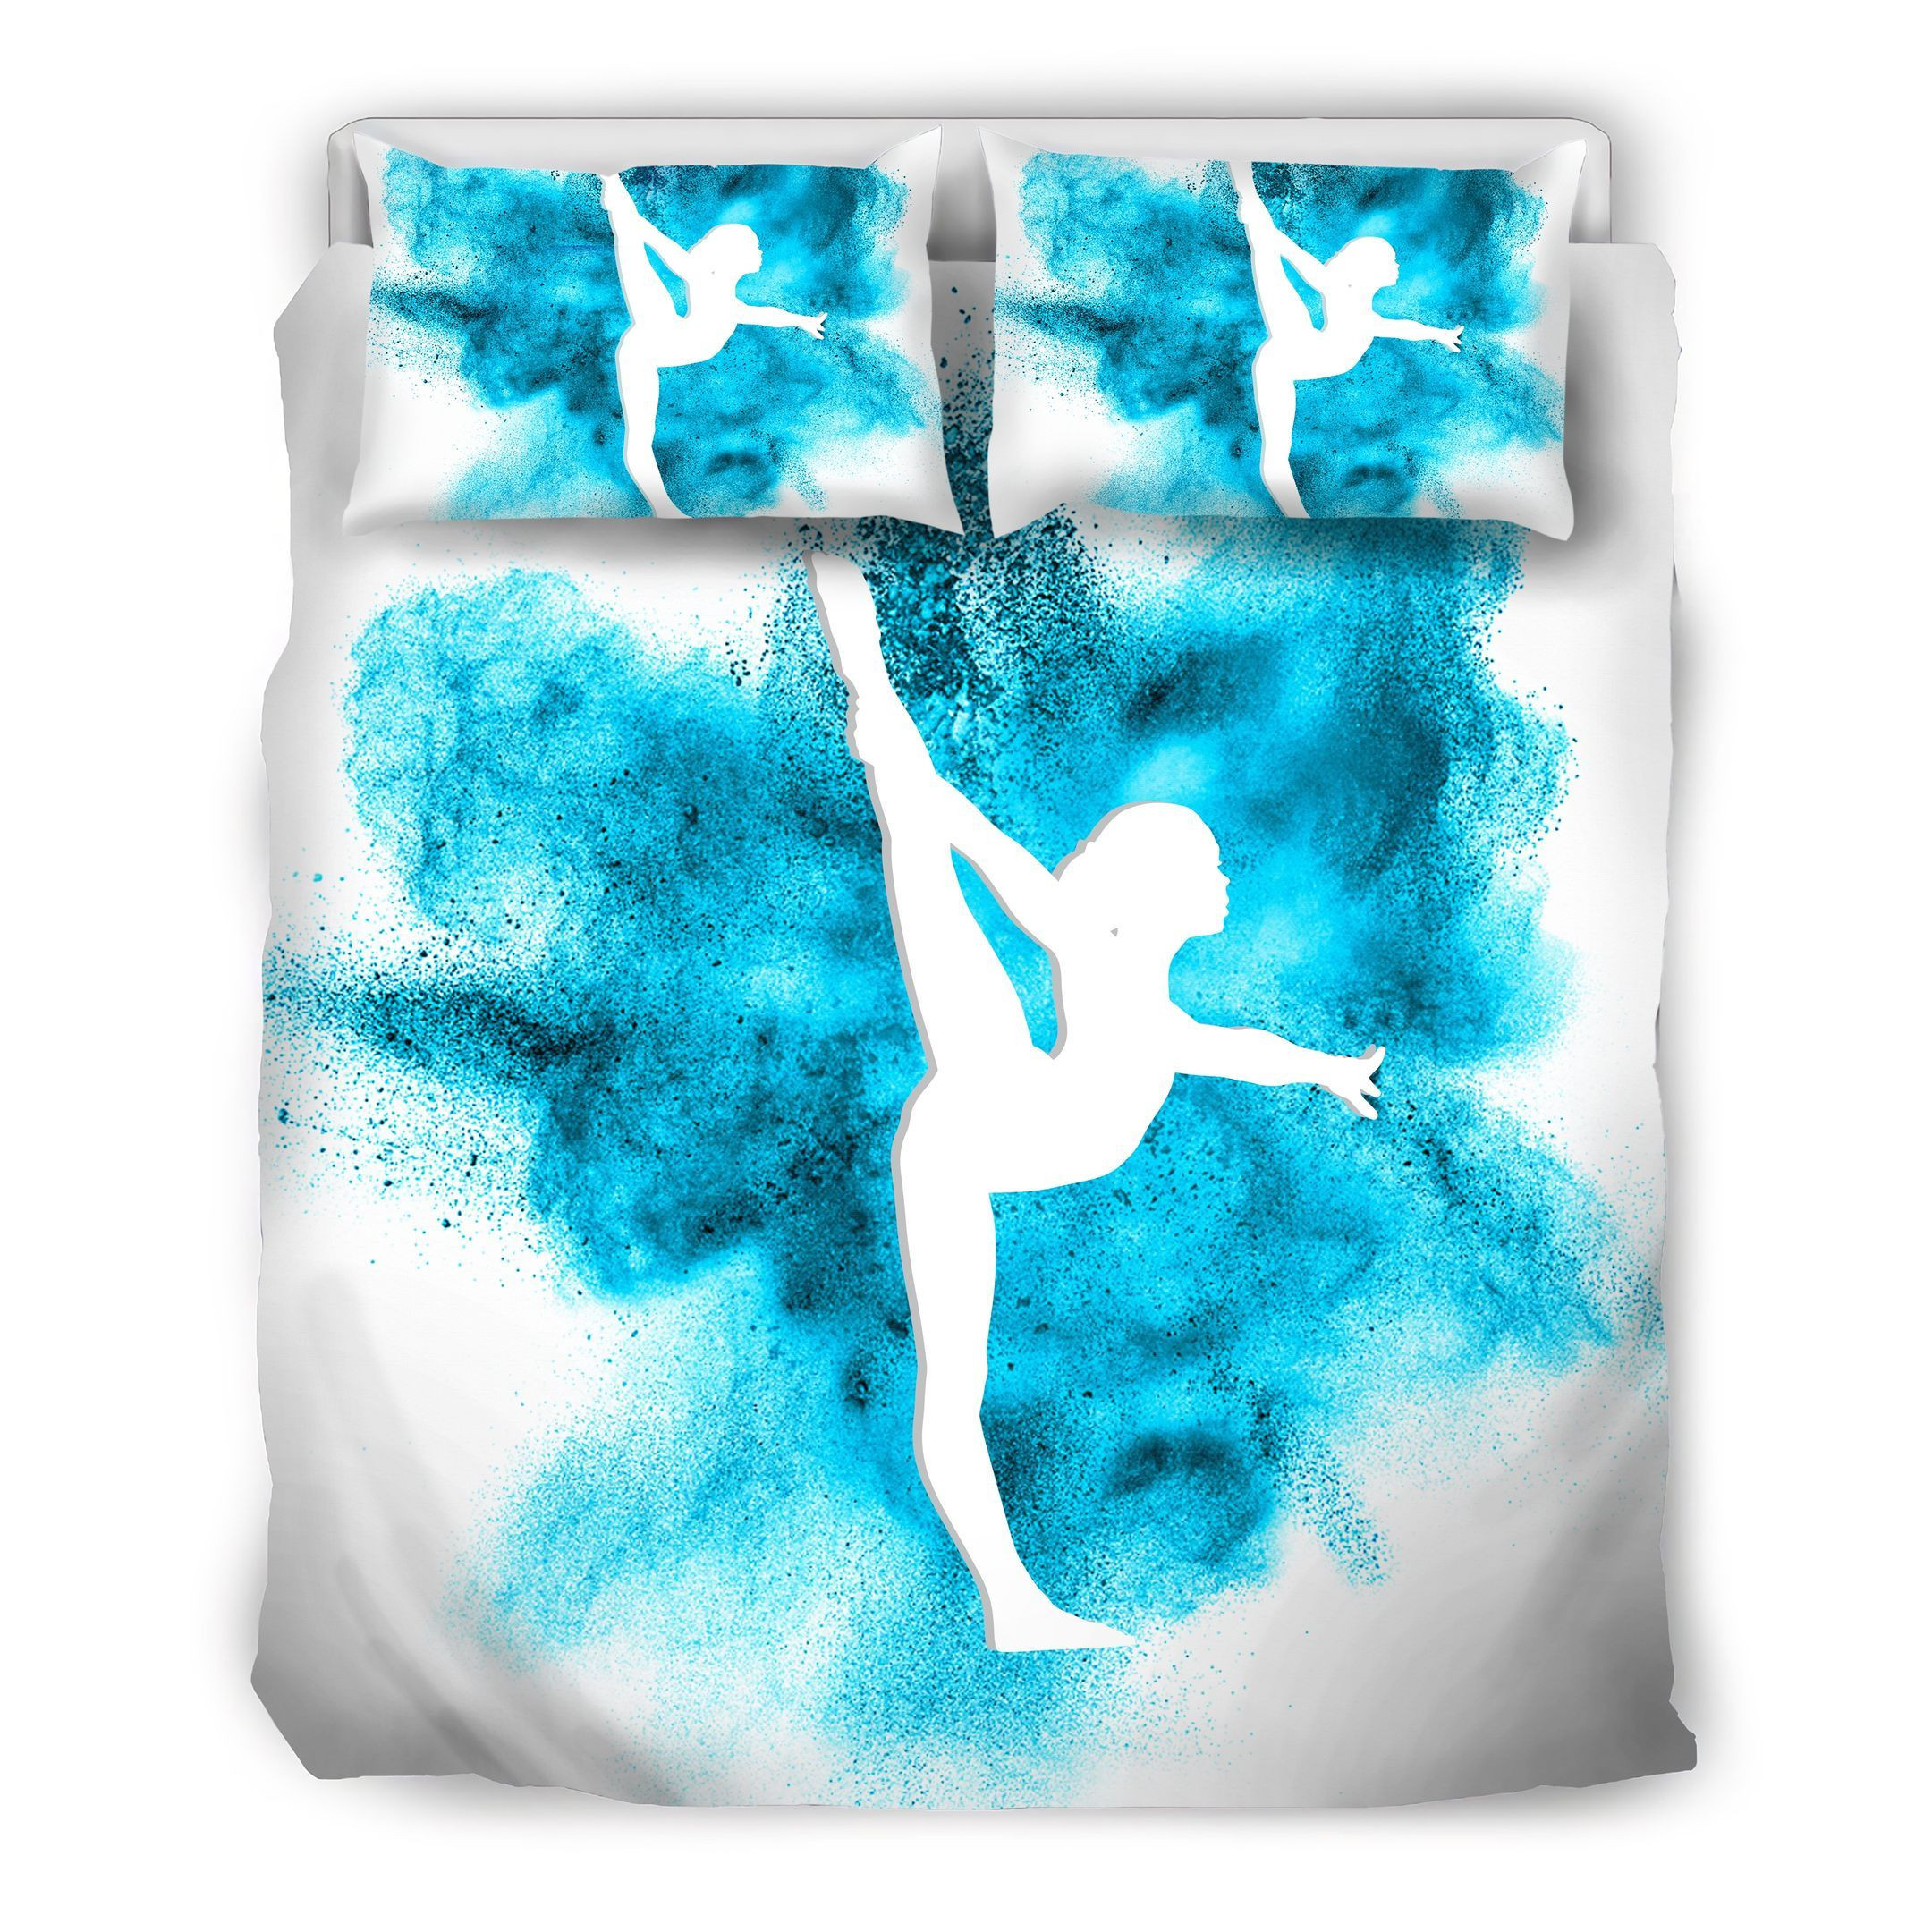 Gymnast Gymnastics Girl Silhouette Blue Explosion Duvet Cover And Pillow Cases Bedding Sets